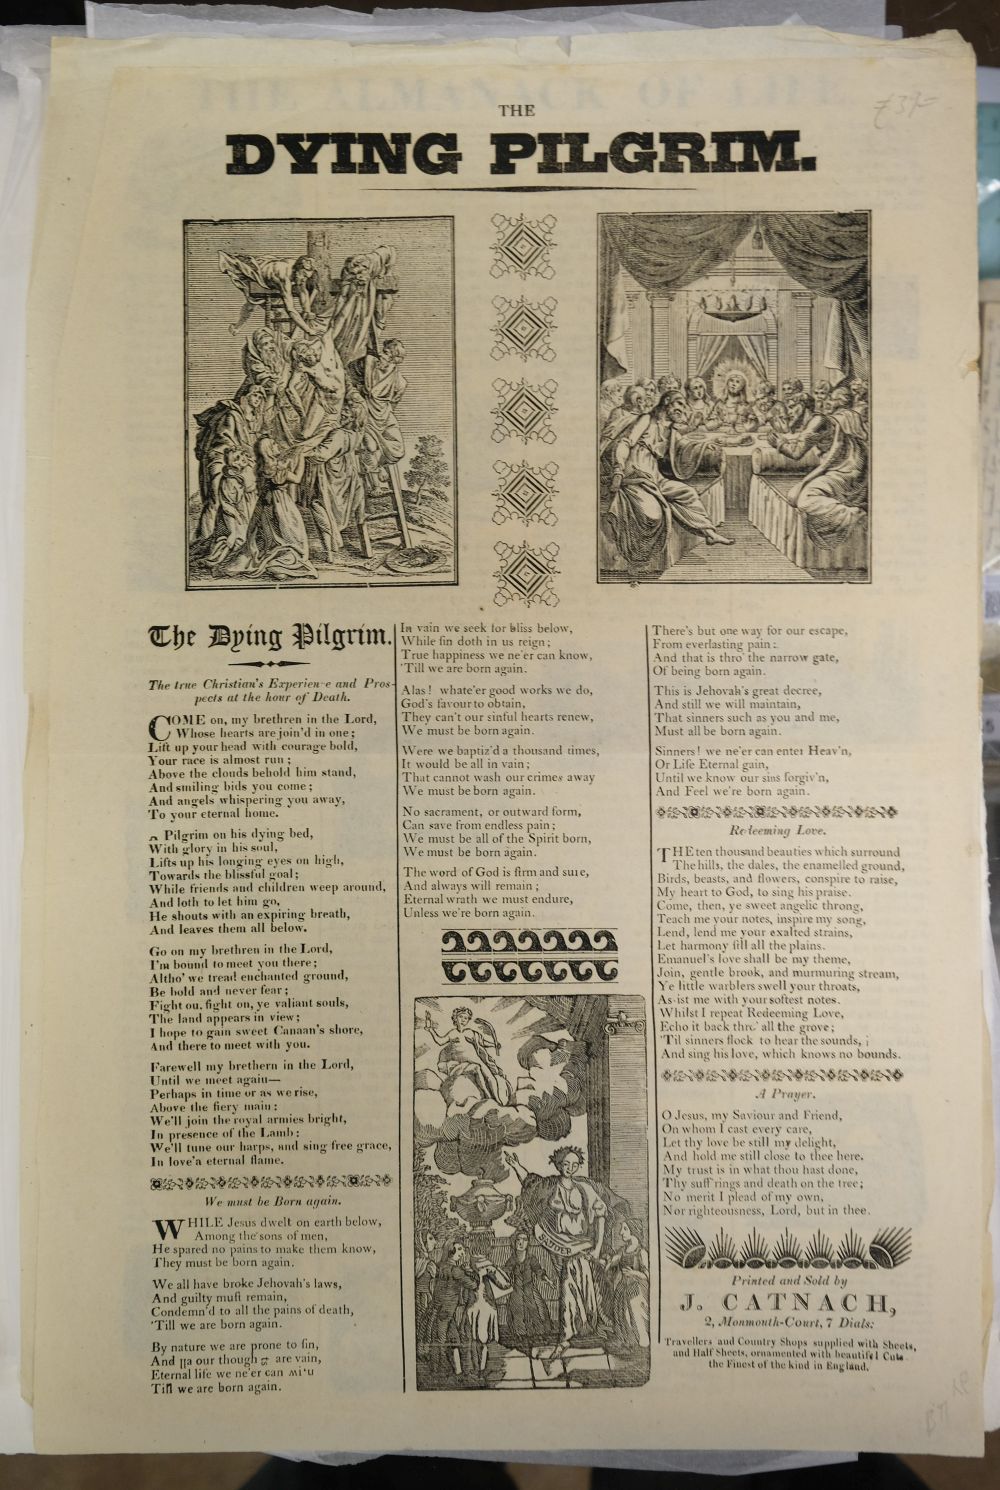 Broadsheets & Broadsides. A collection of 21 broadsheets & broadsides, early 19th century - Image 3 of 7